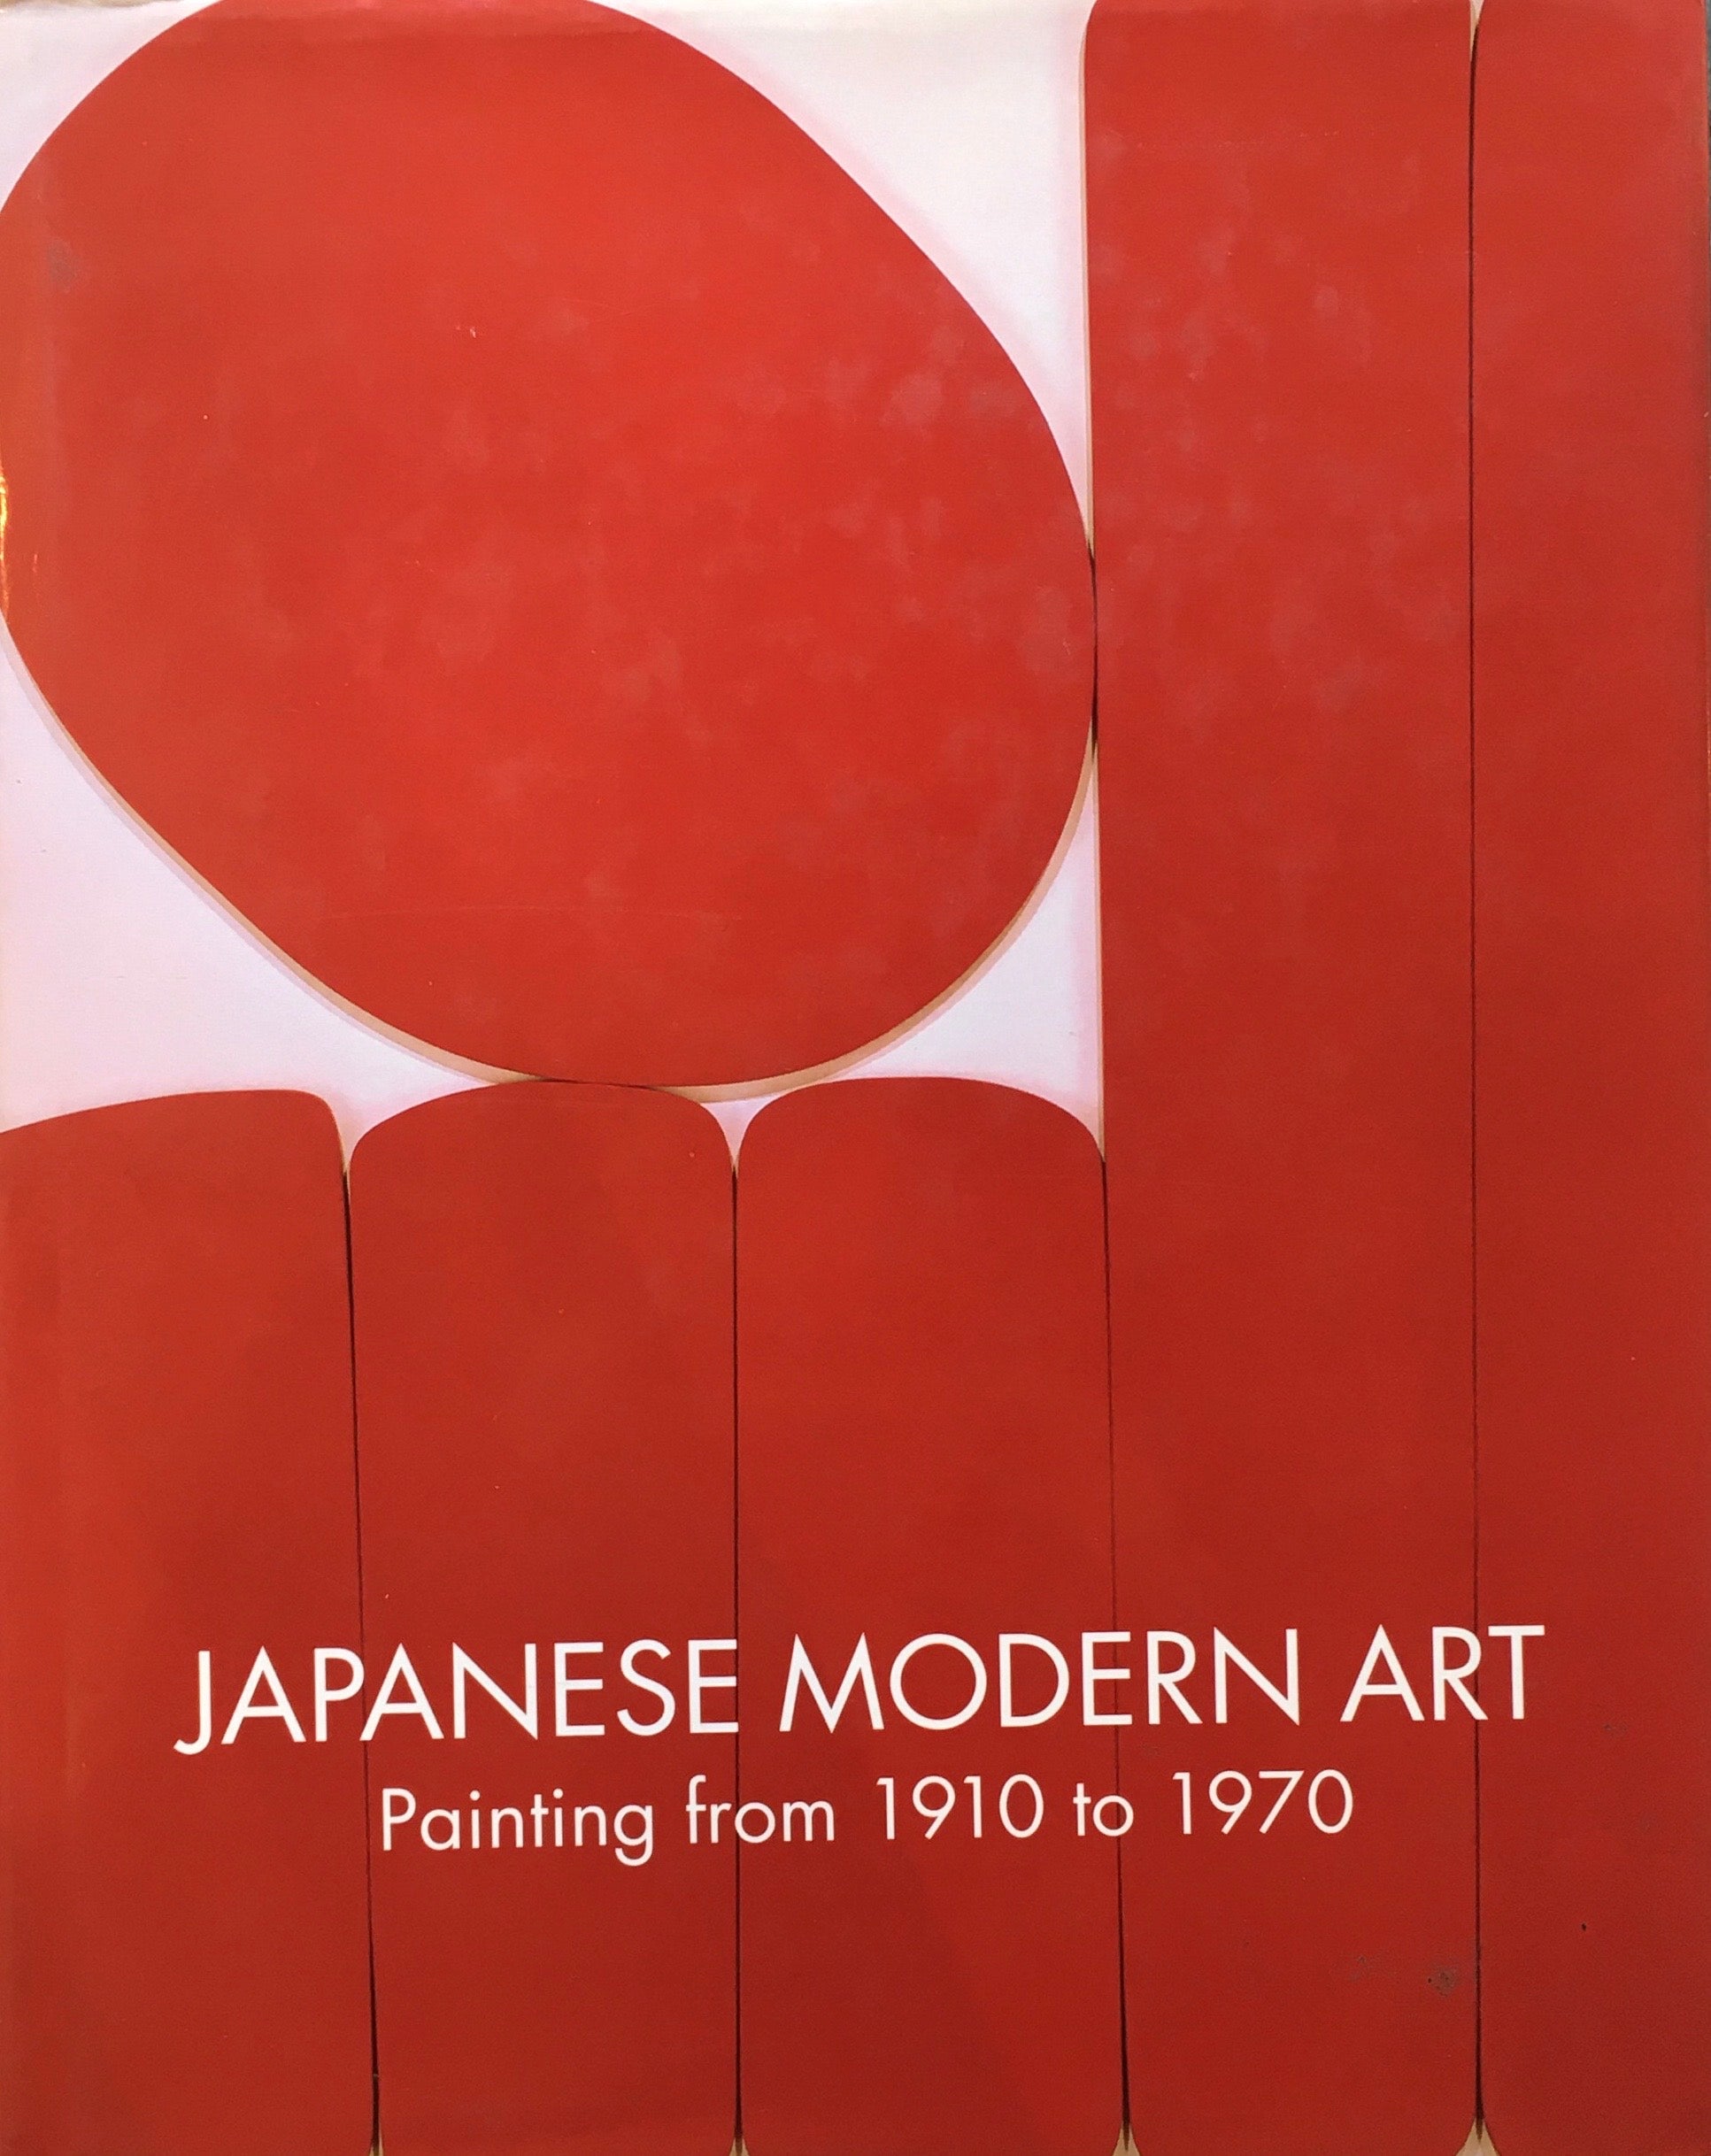 JAPANESE MODERN ART Painting from 1910 to 1970